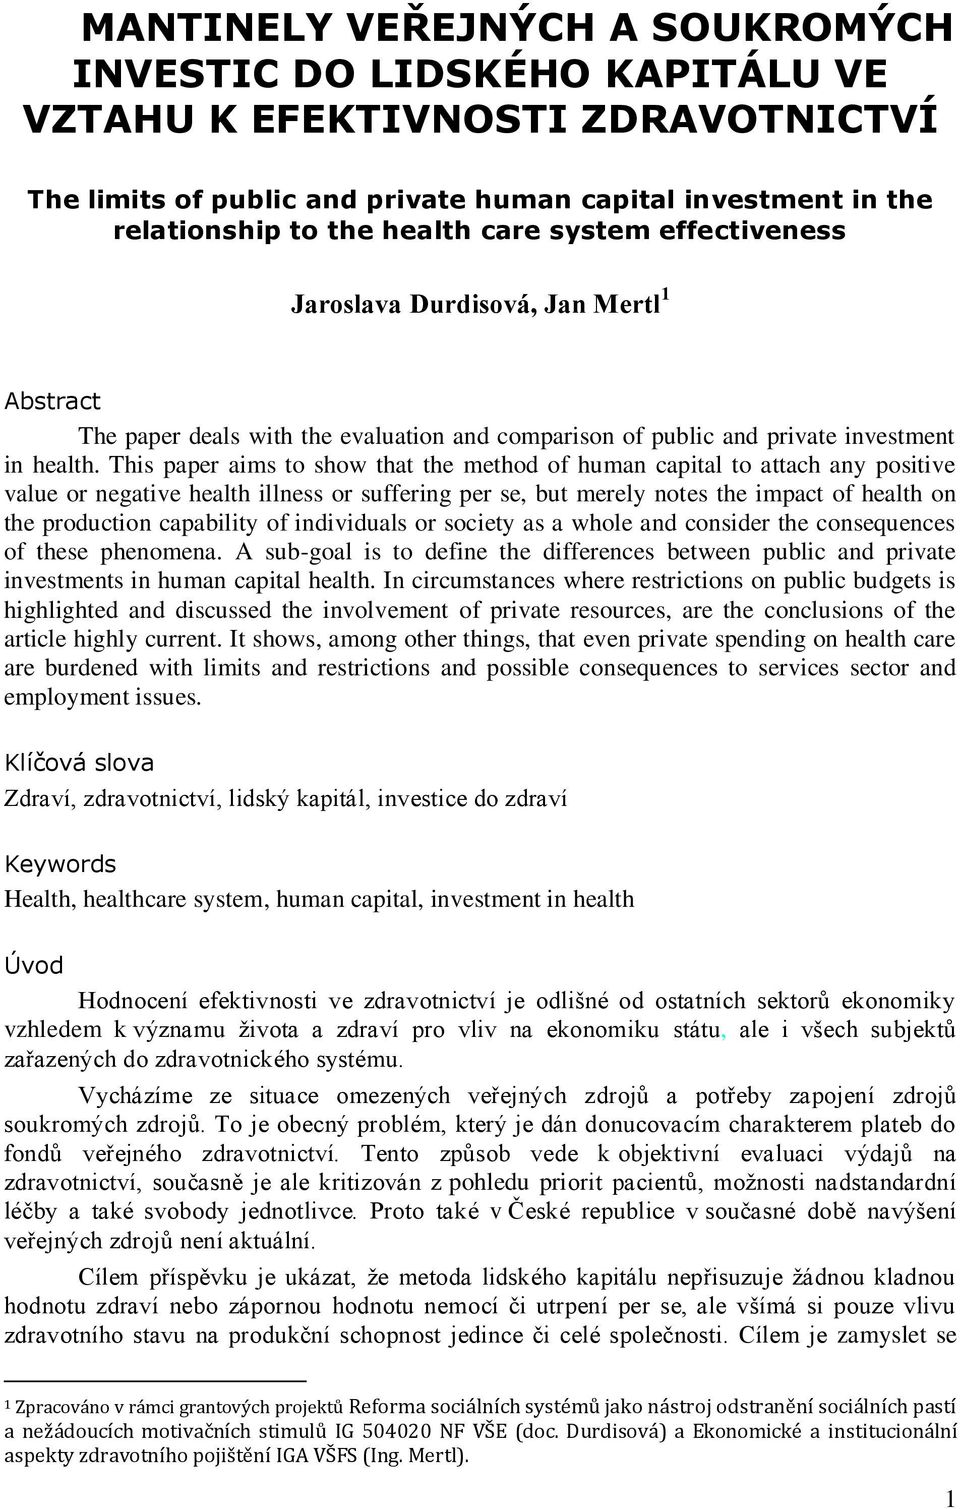 This paper aims to show that the method of human capital to attach any positive value or negative health illness or suffering per se, but merely notes the impact of health on the production